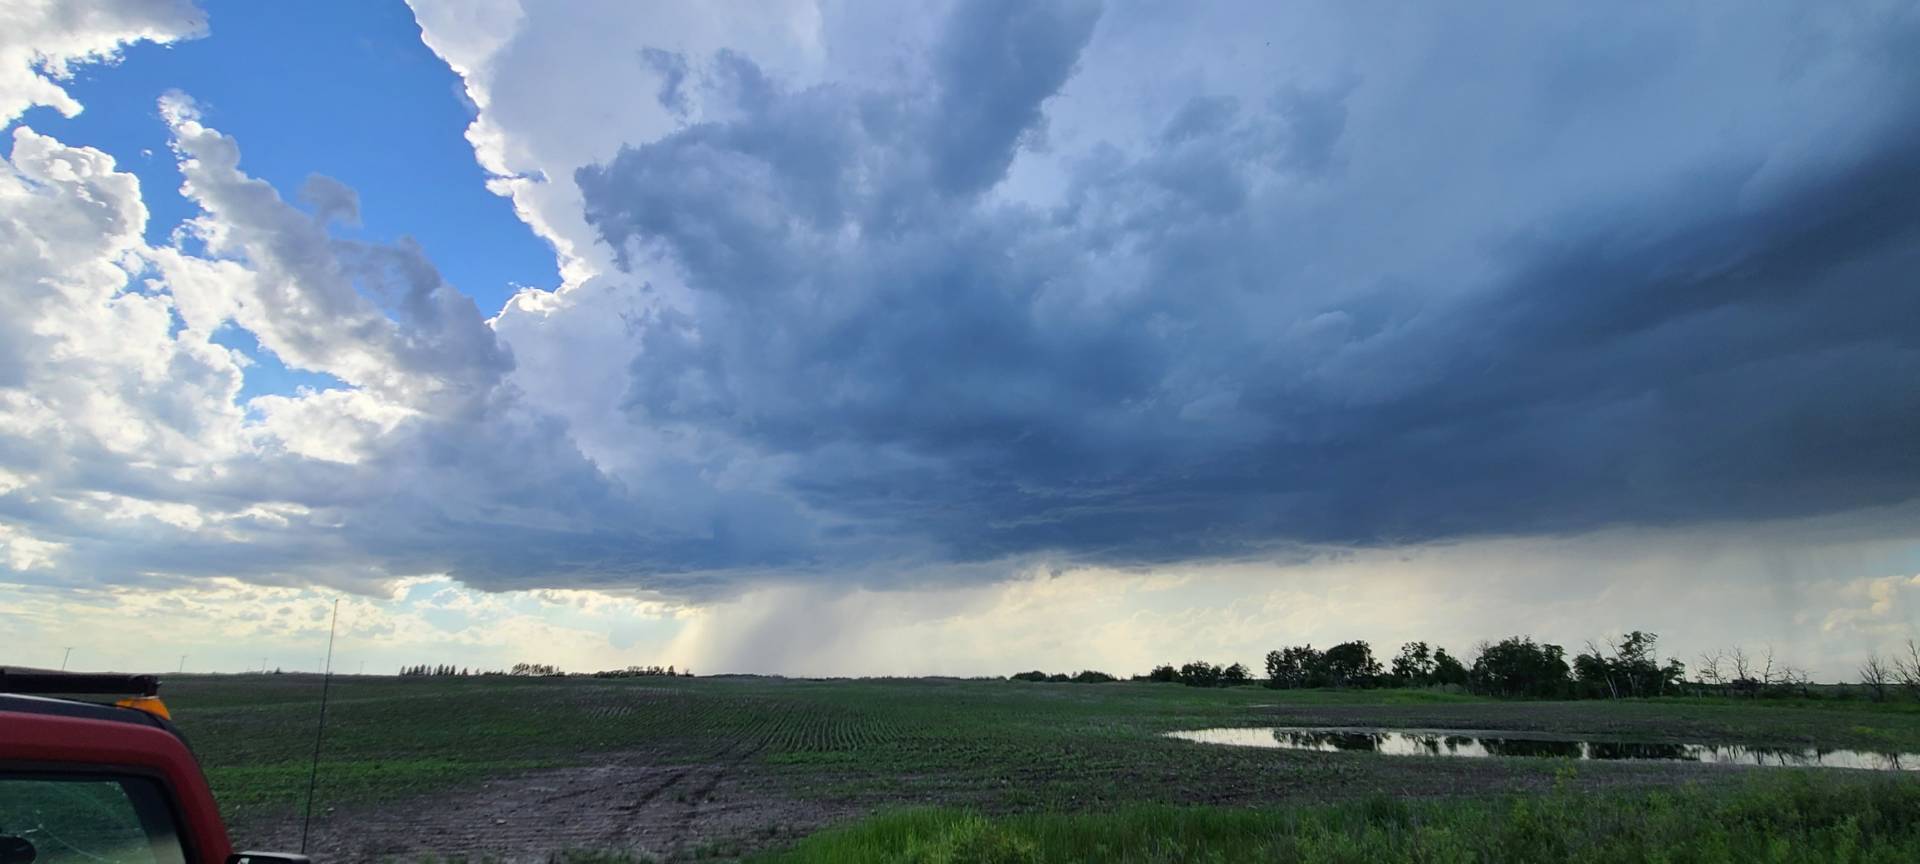 Storm over Neudorf, SK is now Severe warned, Up to Toonie Sized hail, and very strong wind gusts possible. Watching from near Grayson, Saskatchewan 05:19 PM @ECCCWeatherSK #SKstorm #SKwx